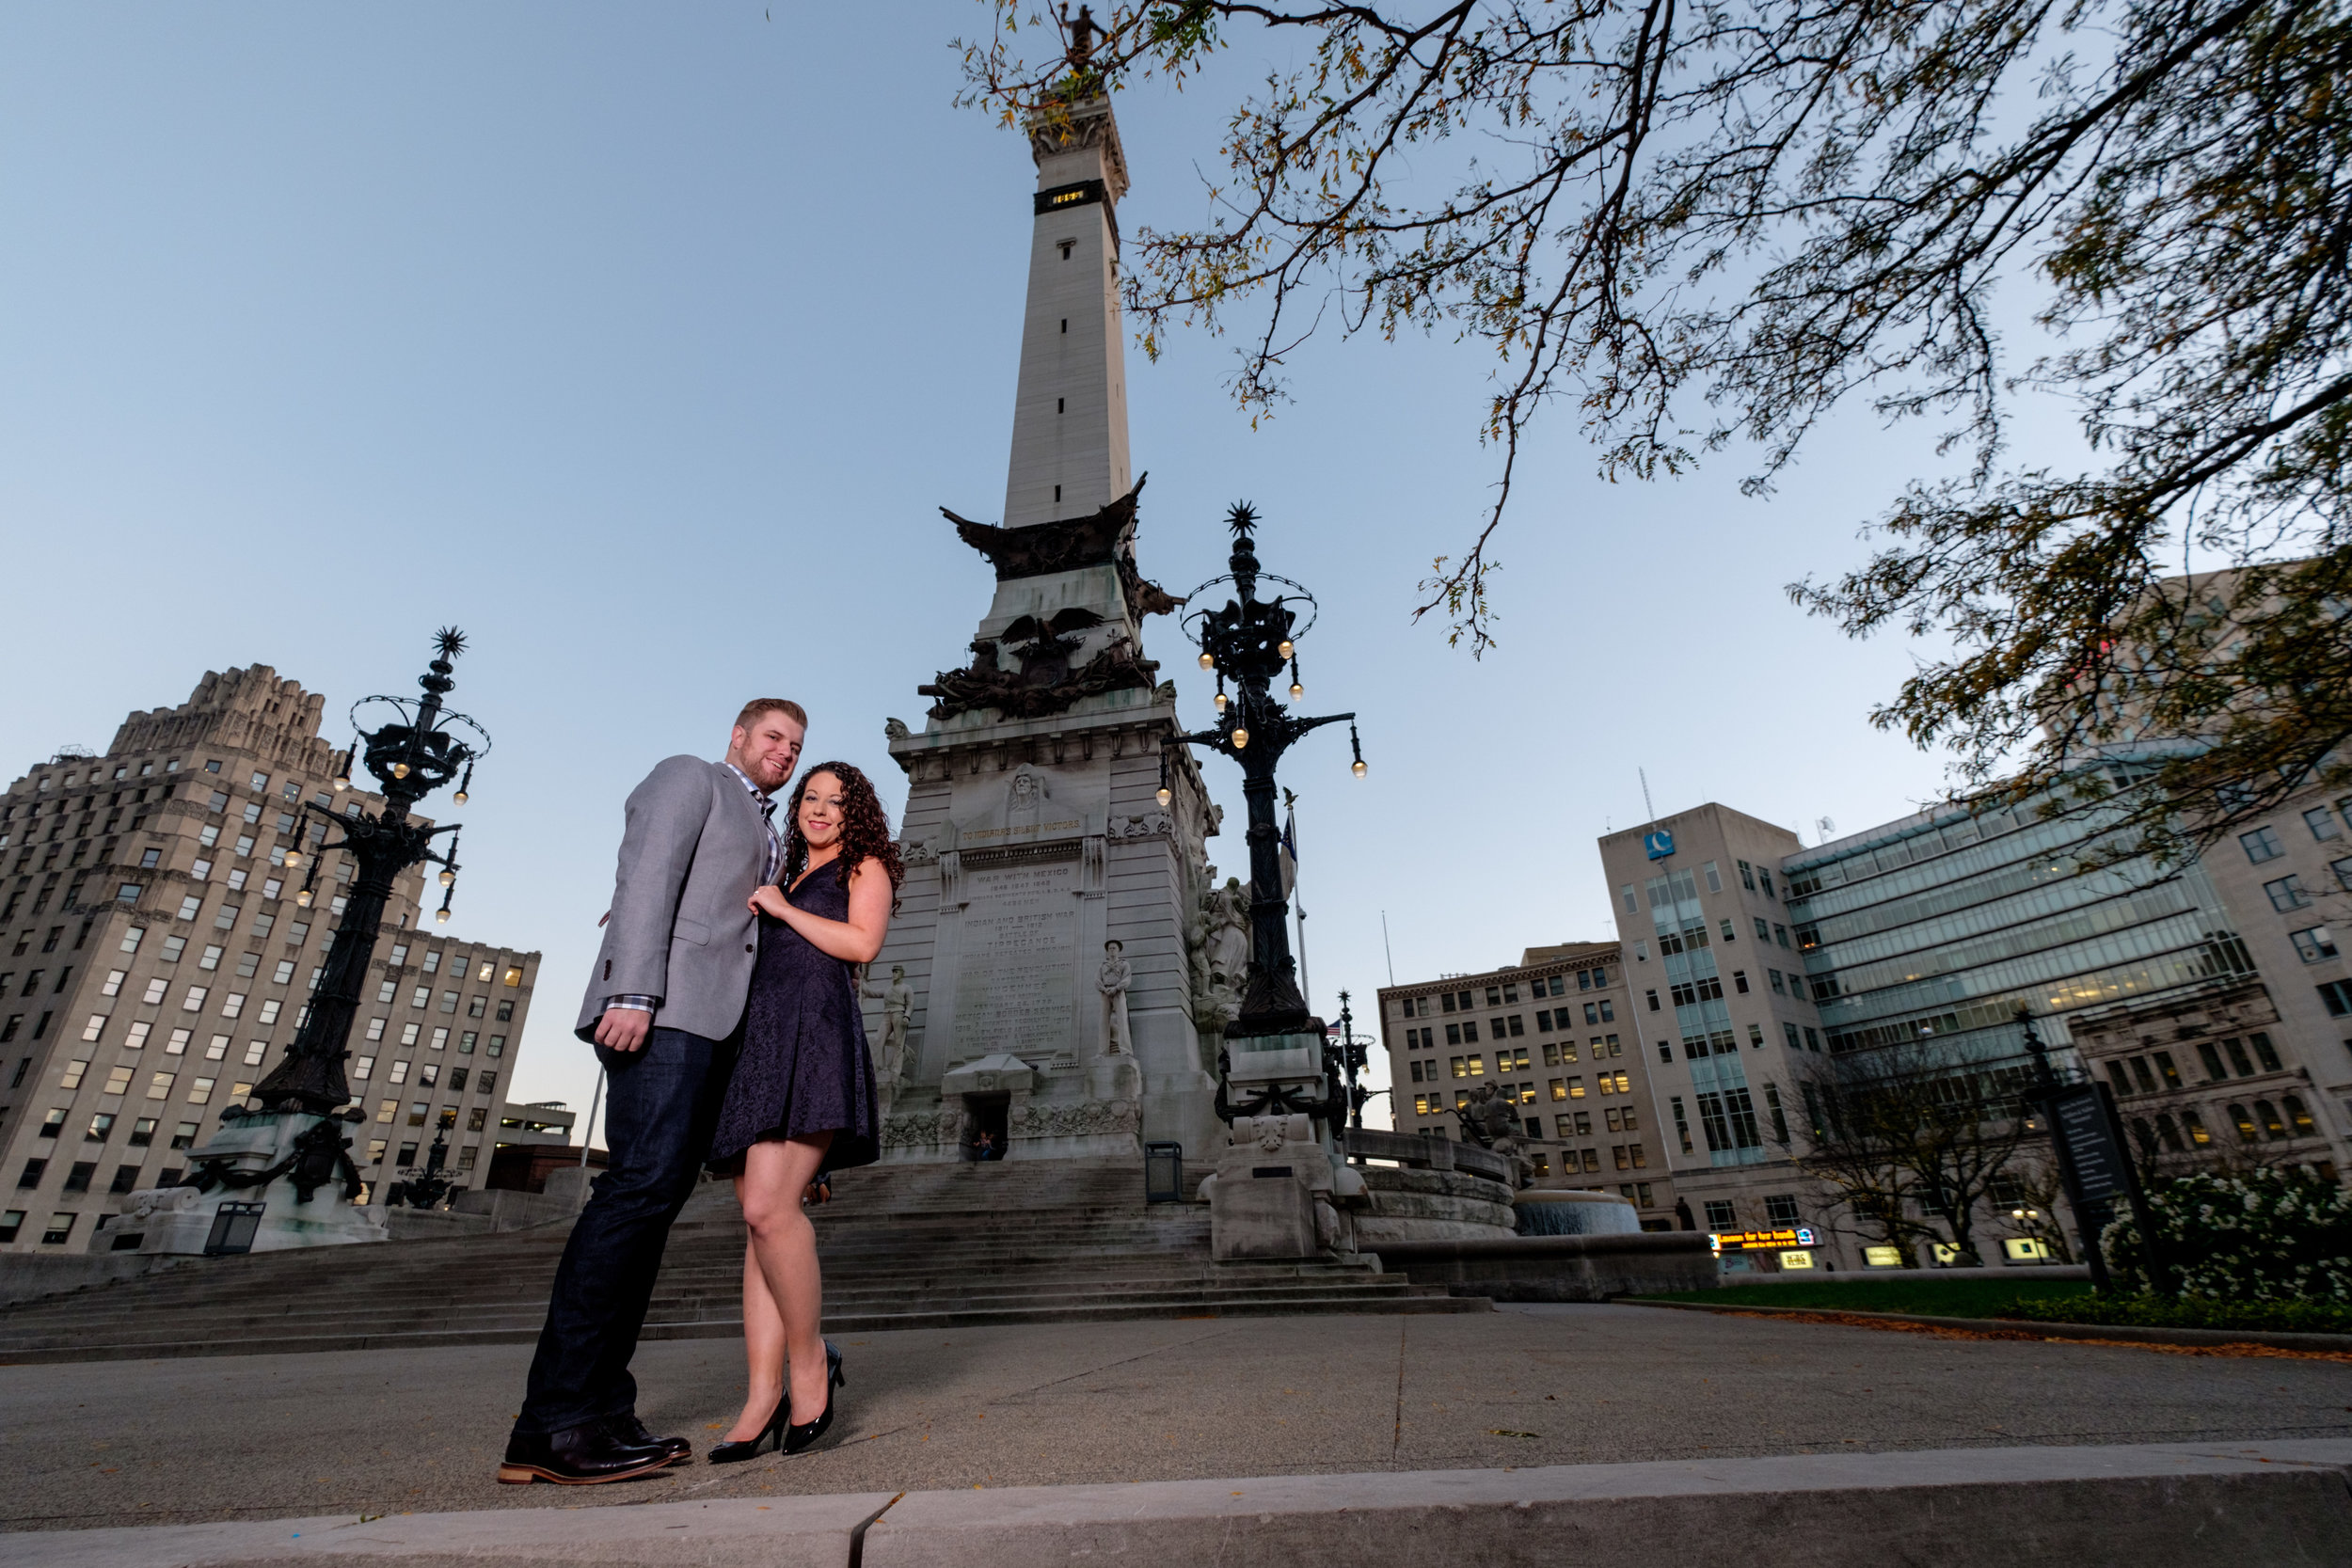 Downtown-Indianapolis-night-engagement-pictures-01.jpg